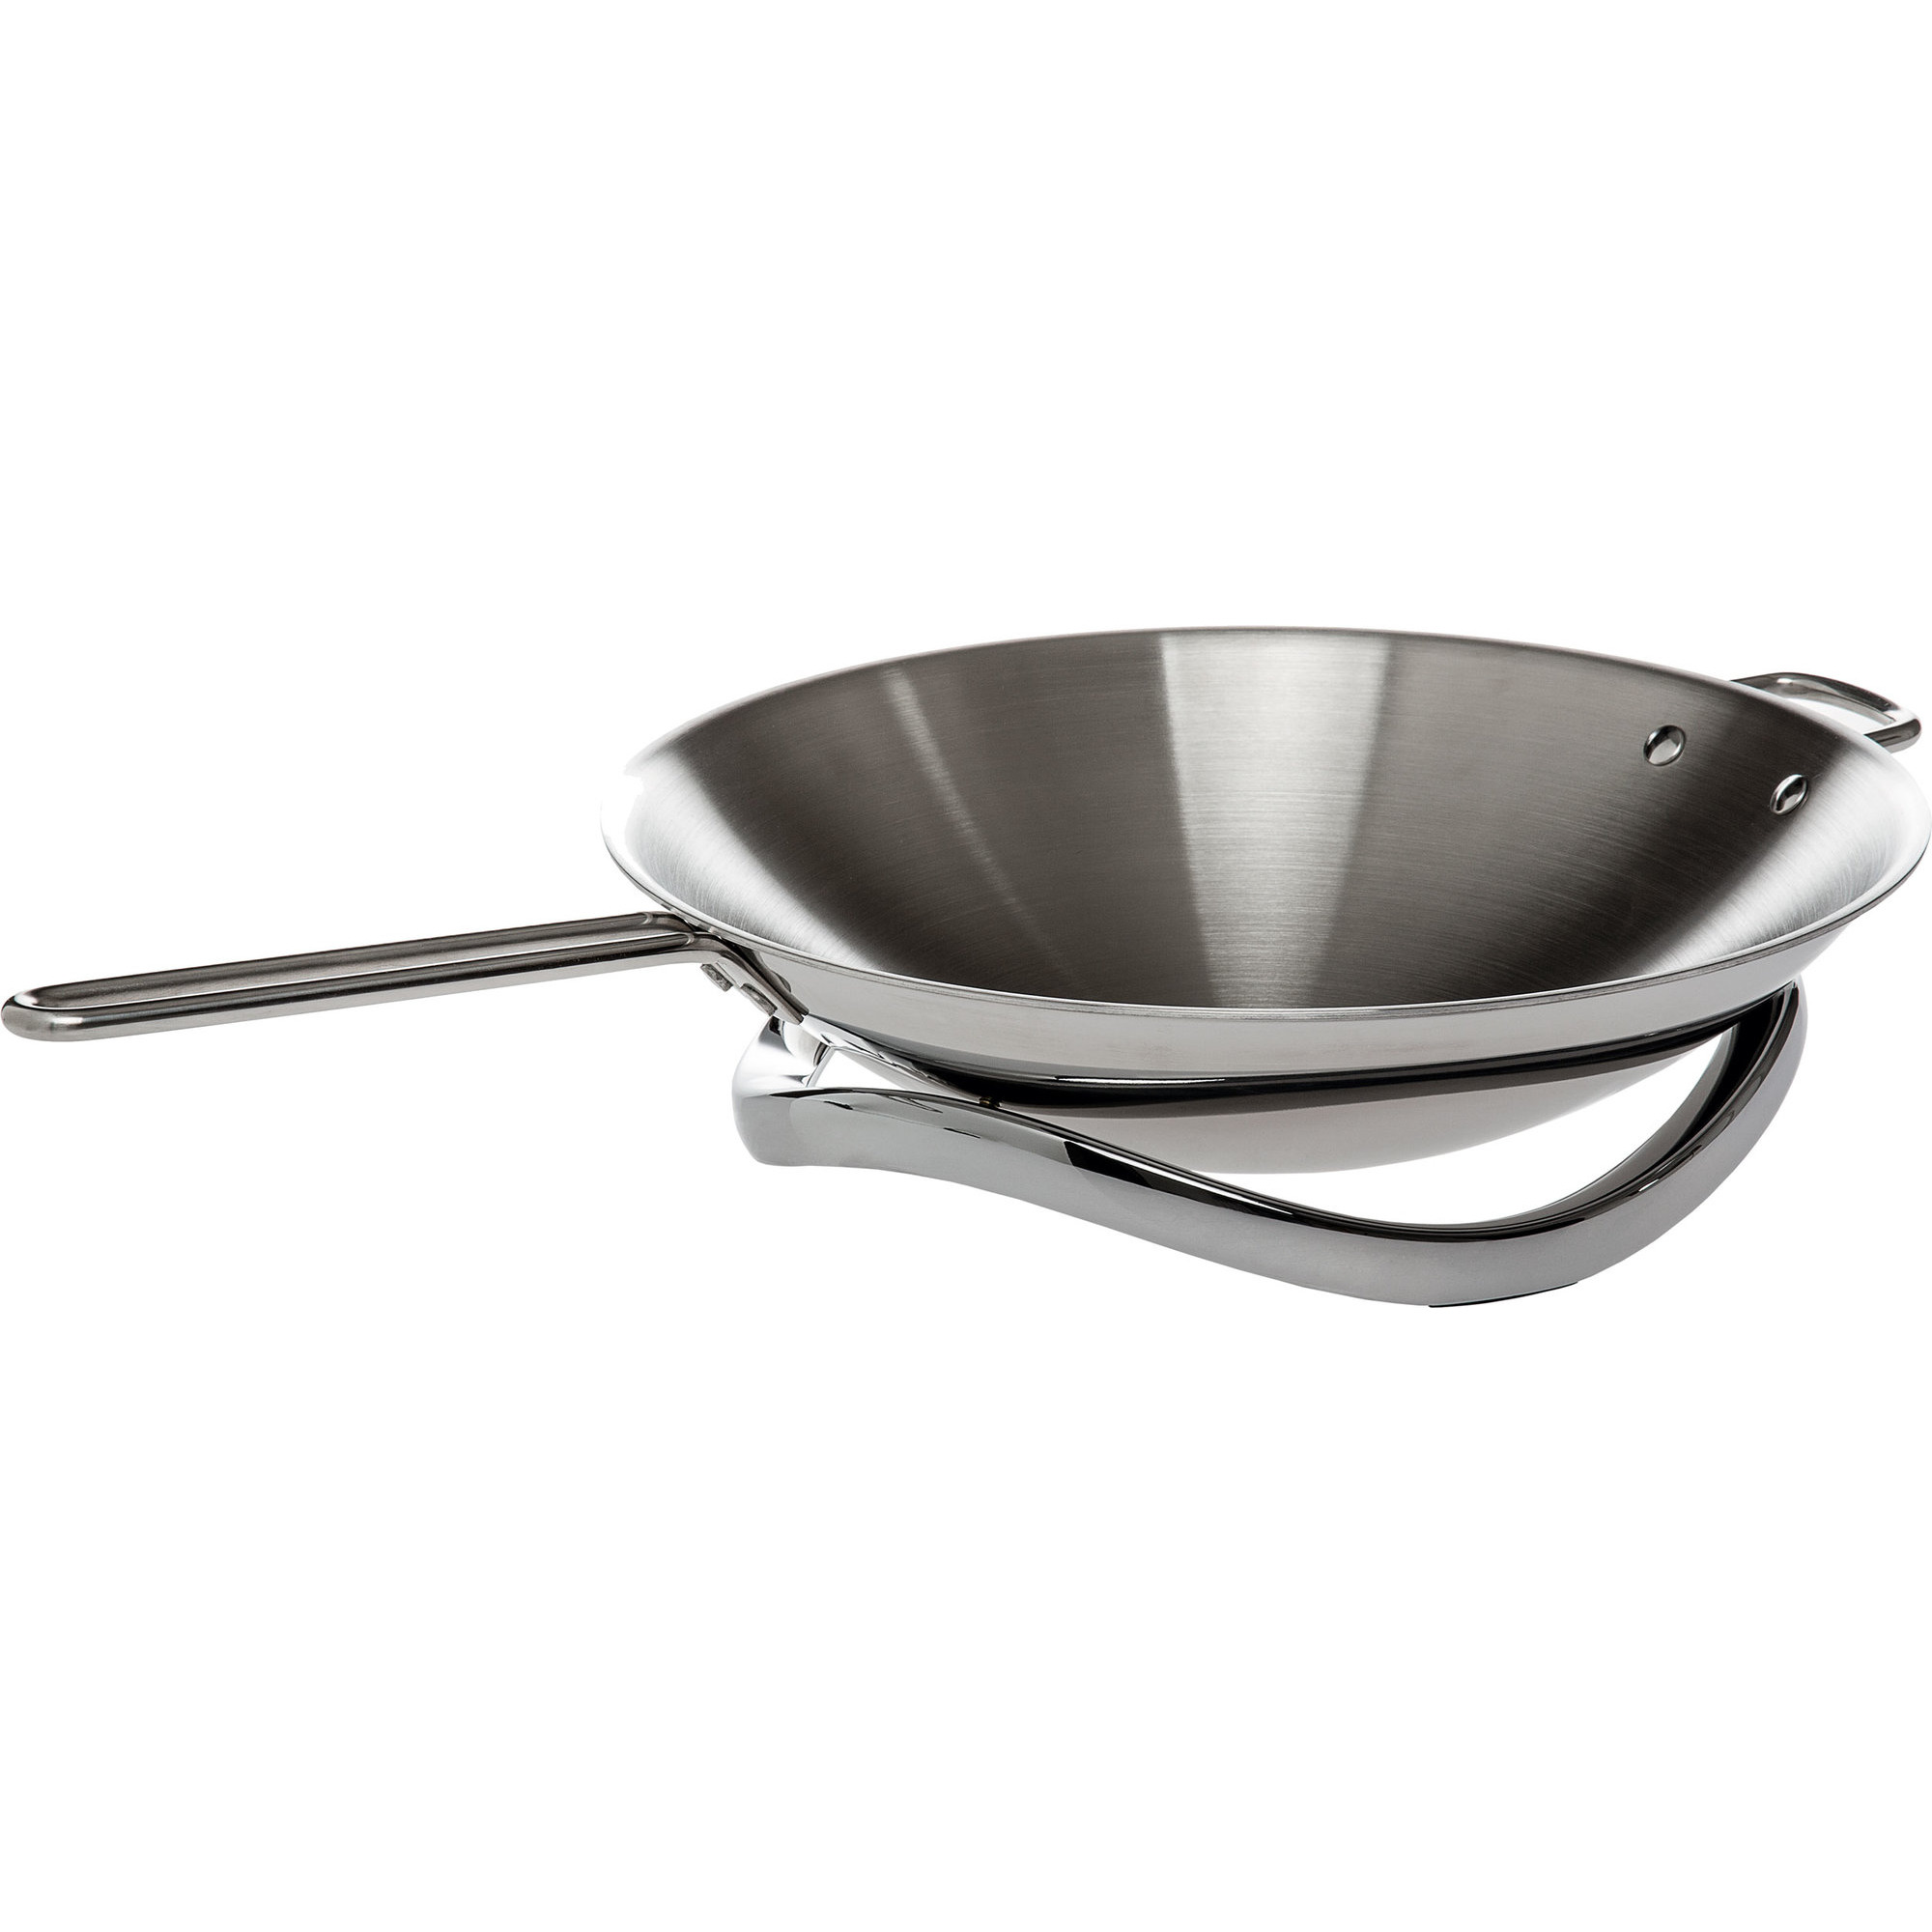 Electrolux Infinite Chef Collection wok